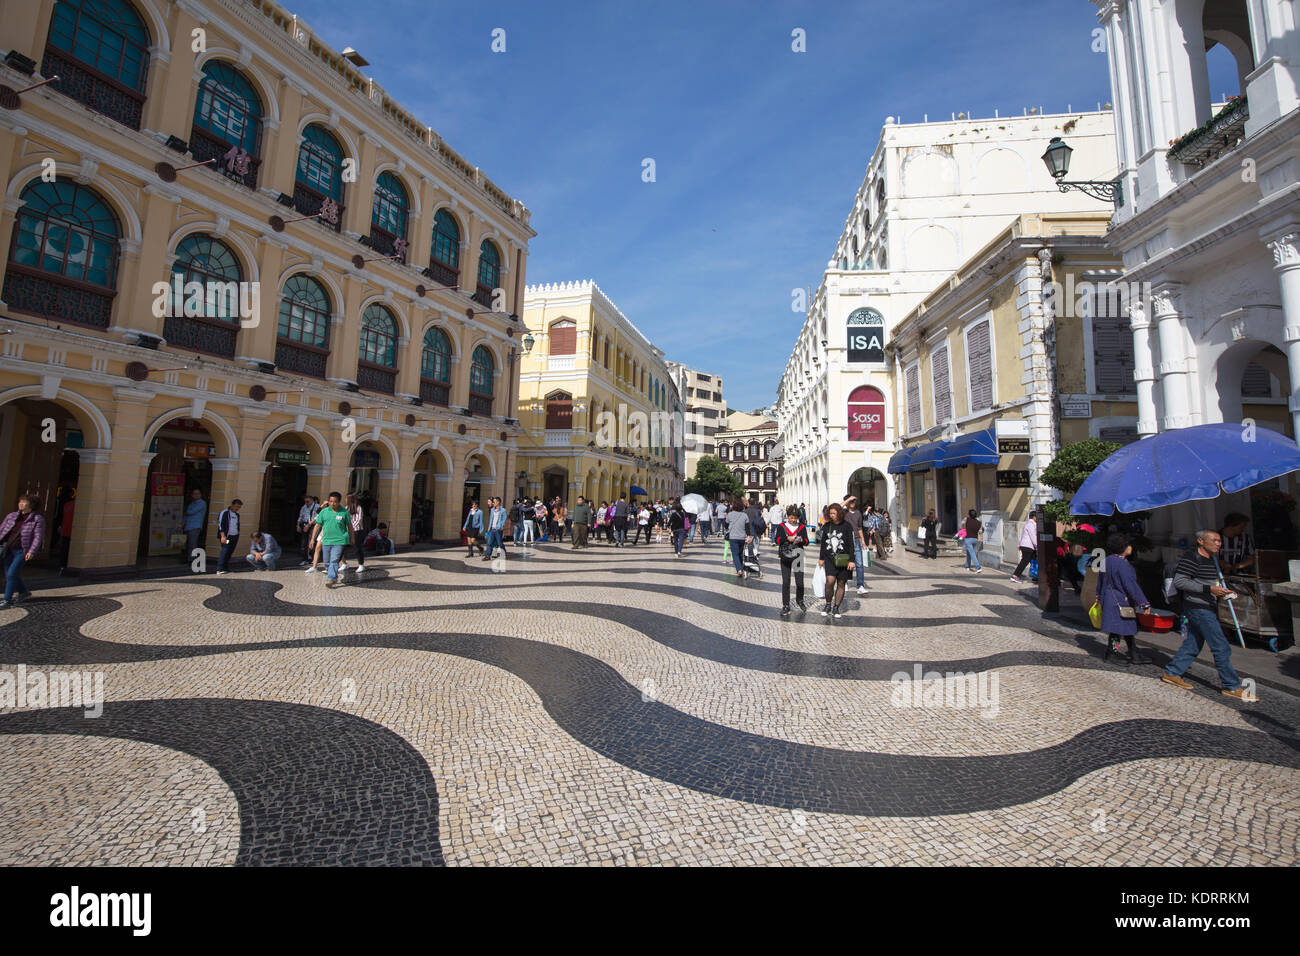 Macao,china - feb,17,2017:The Senado Square, or Senate Square is a paved town square in Macau, China and part of the UNESCO Historic Centre of Macau W Stock Photo